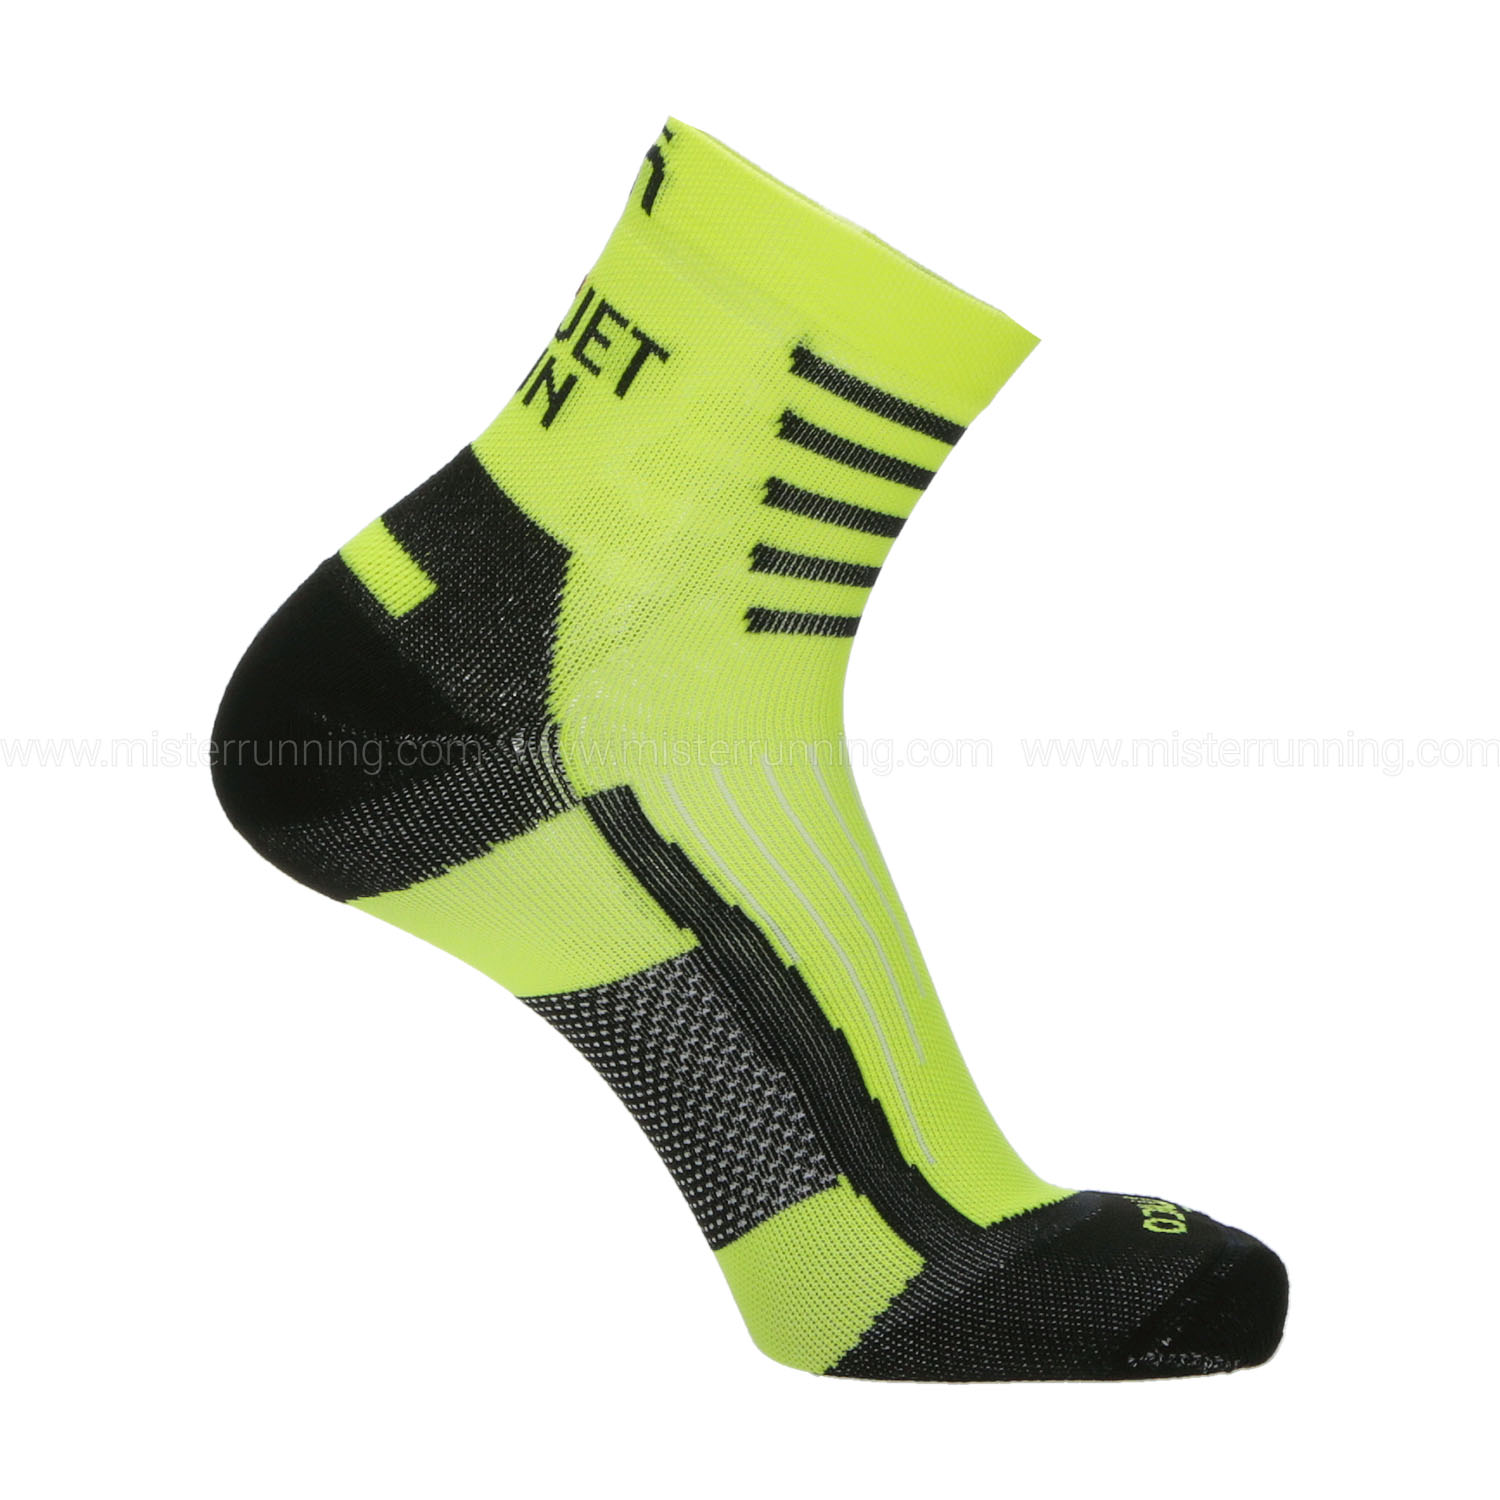 Mico Oxi-jet Light Weight Compression Calze - Giallo Fluo